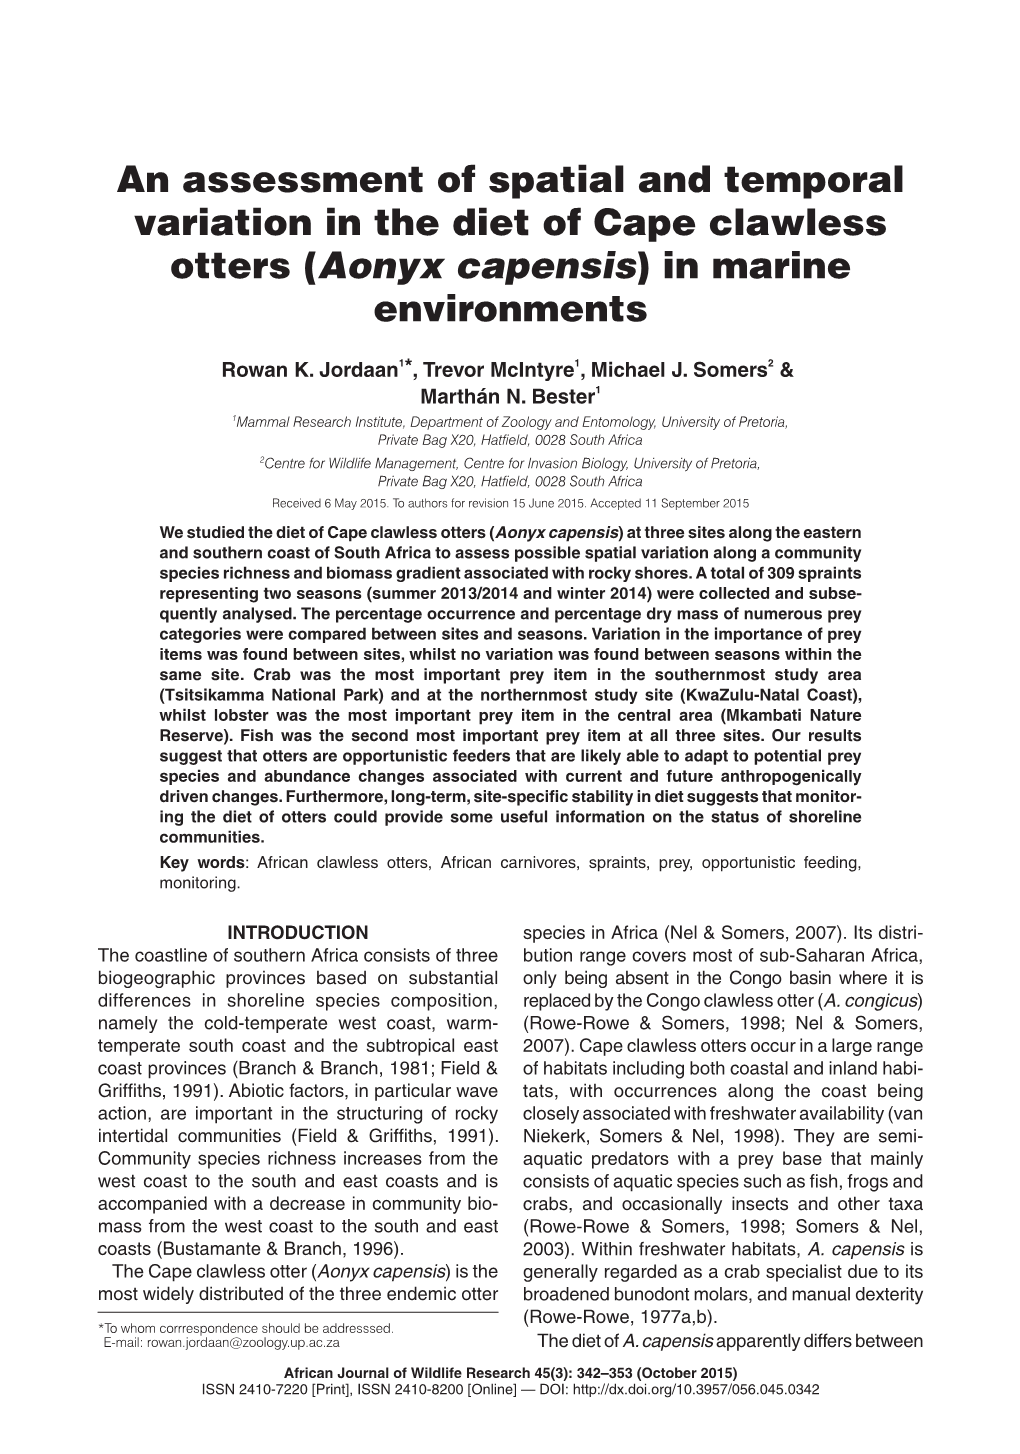 Otters (Aonyx Capensis) in Marine Environments